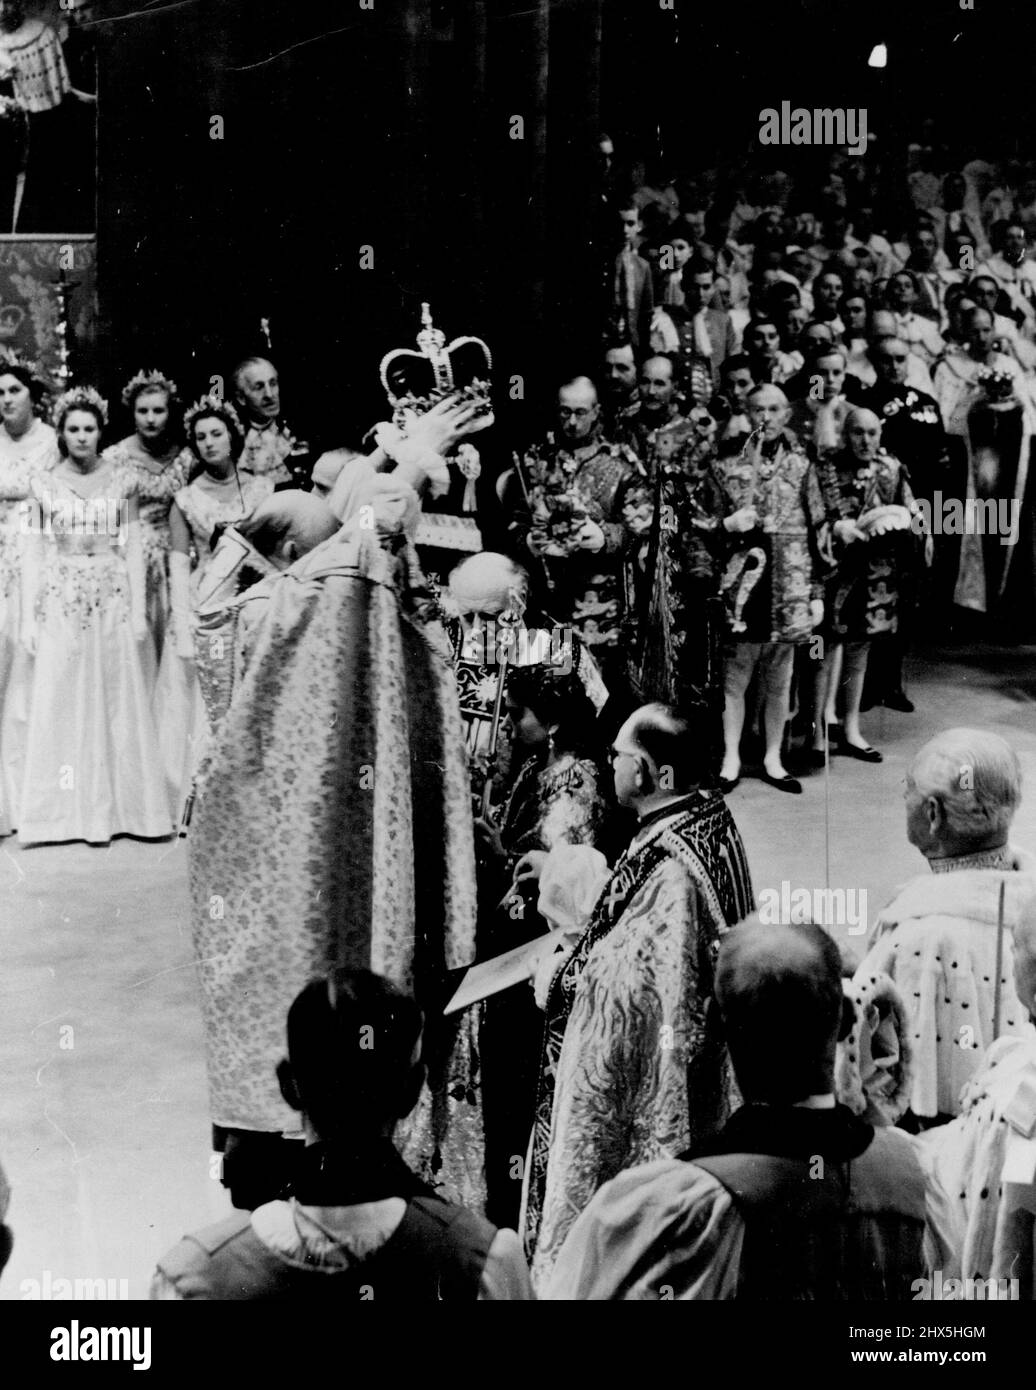 The supreme moment of the Crowning of Queen Elizabeth II. The Archbishop of Canterbury receiving the Crown of St. Edward from the Dean of Westminster, placed it reverently upon the Queen's head. As she was crowned the congregation shouted, 'God Save the Queen;' peers and peeresses put on their coronets, Kings of Arms their crowns, and a fanfare of trumpets was sounded. Outside bells pealed and guns fired a salute. June 02, 1953. (Photo by Daily Mirror). Stock Photo